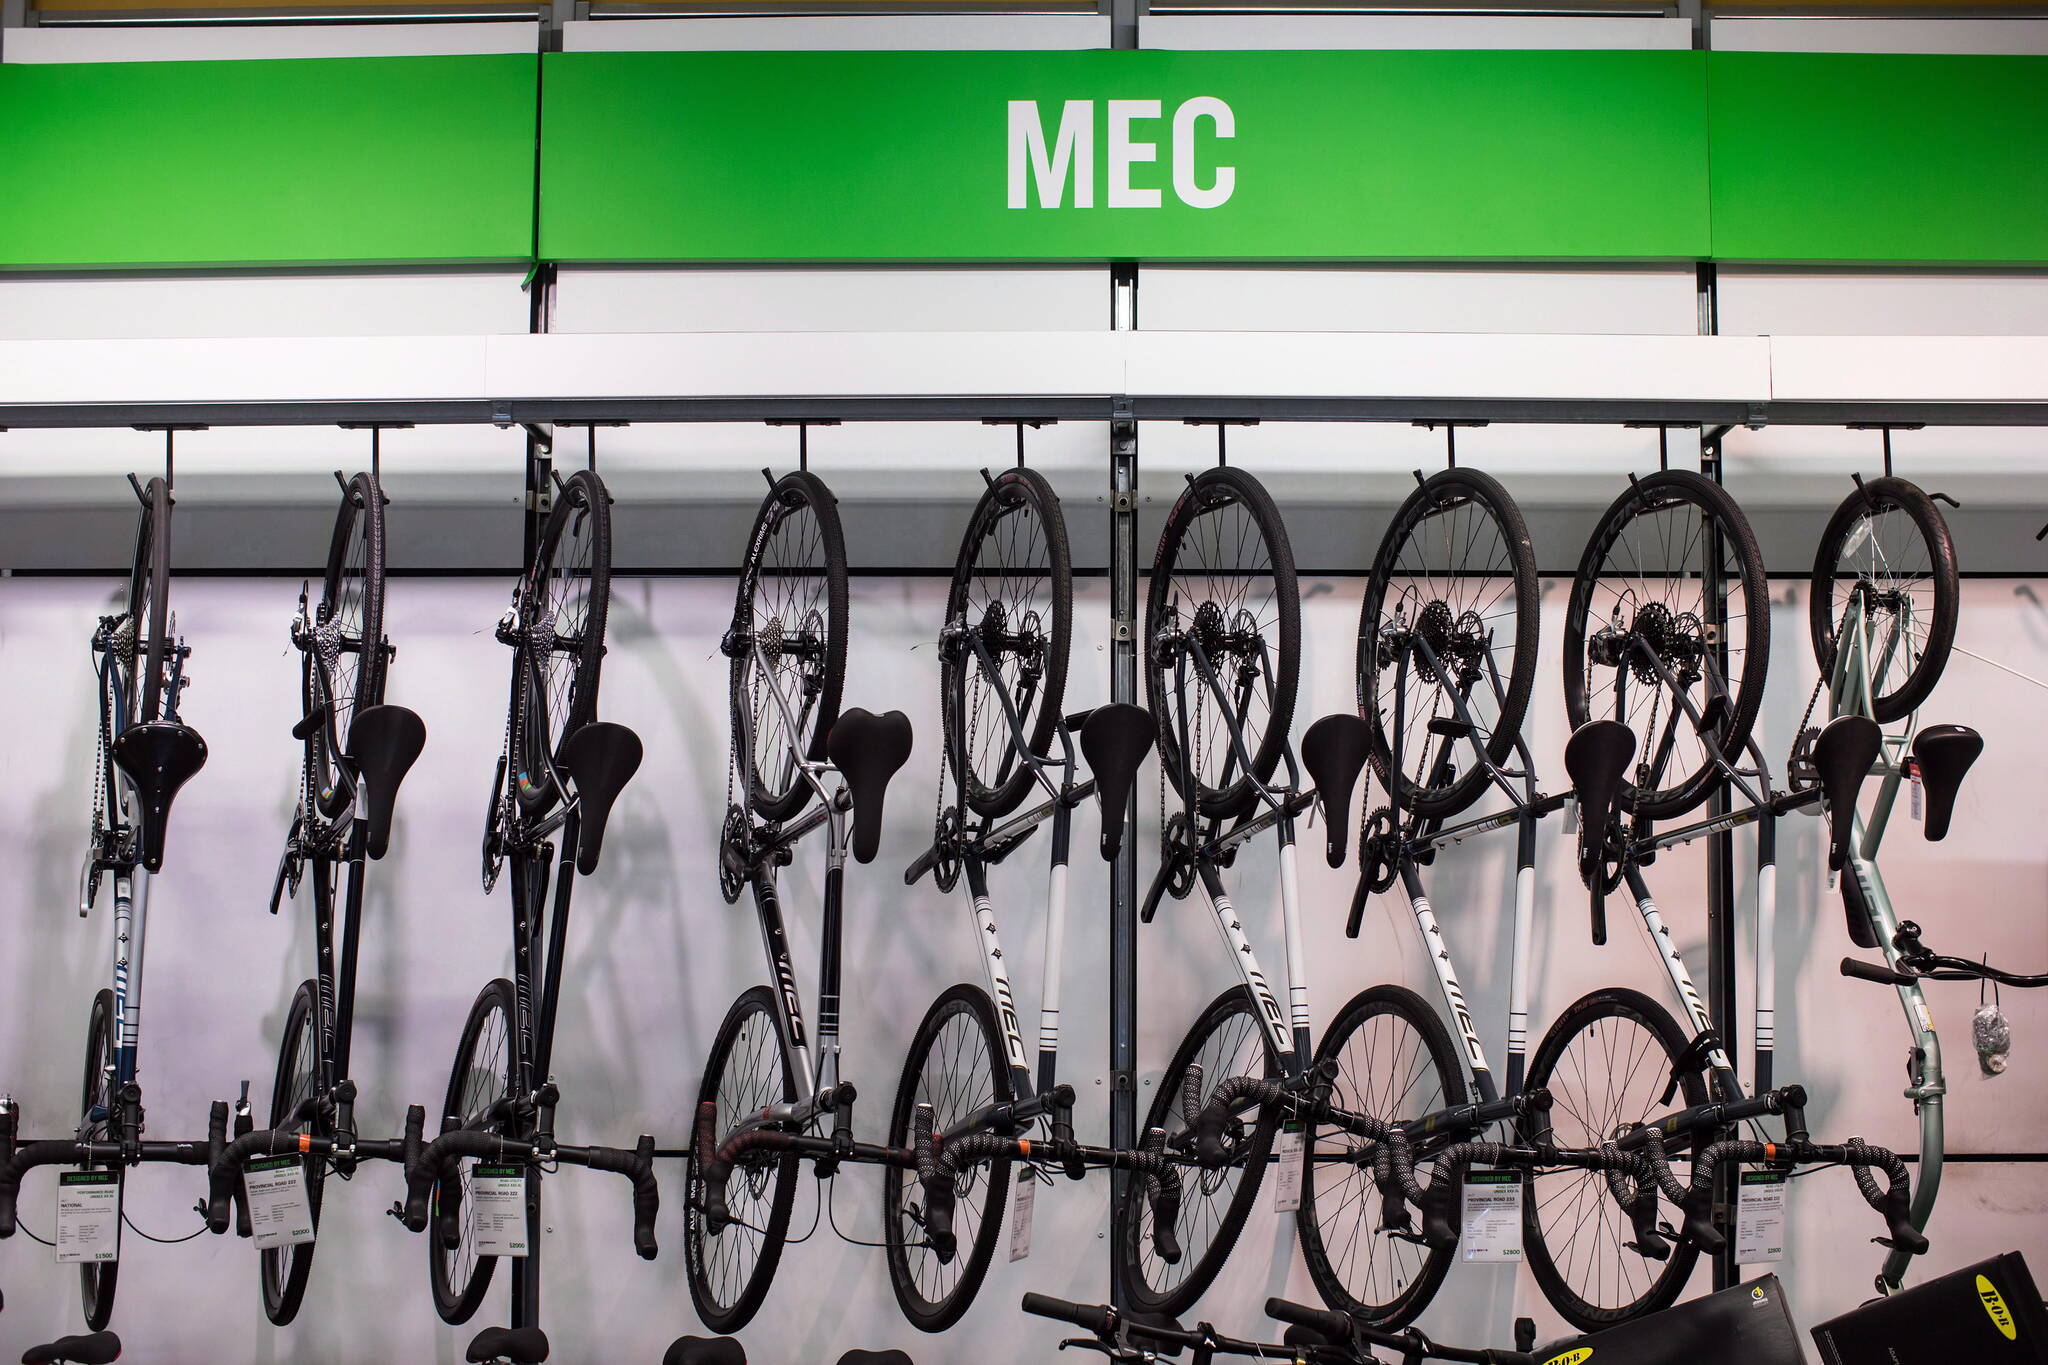 Bikes are seen for sale at a Mountain Equipment Co-op (MEC) store in Vancouver on Thursday, March 1, 2018. CEO David Labistour announced Thursday that MEC will stop selling several outdoor equipment brands owned by Vista Outdoor Inc., which is also a gun manufacturer. THE CANADIAN PRESS/Darryl Dyck